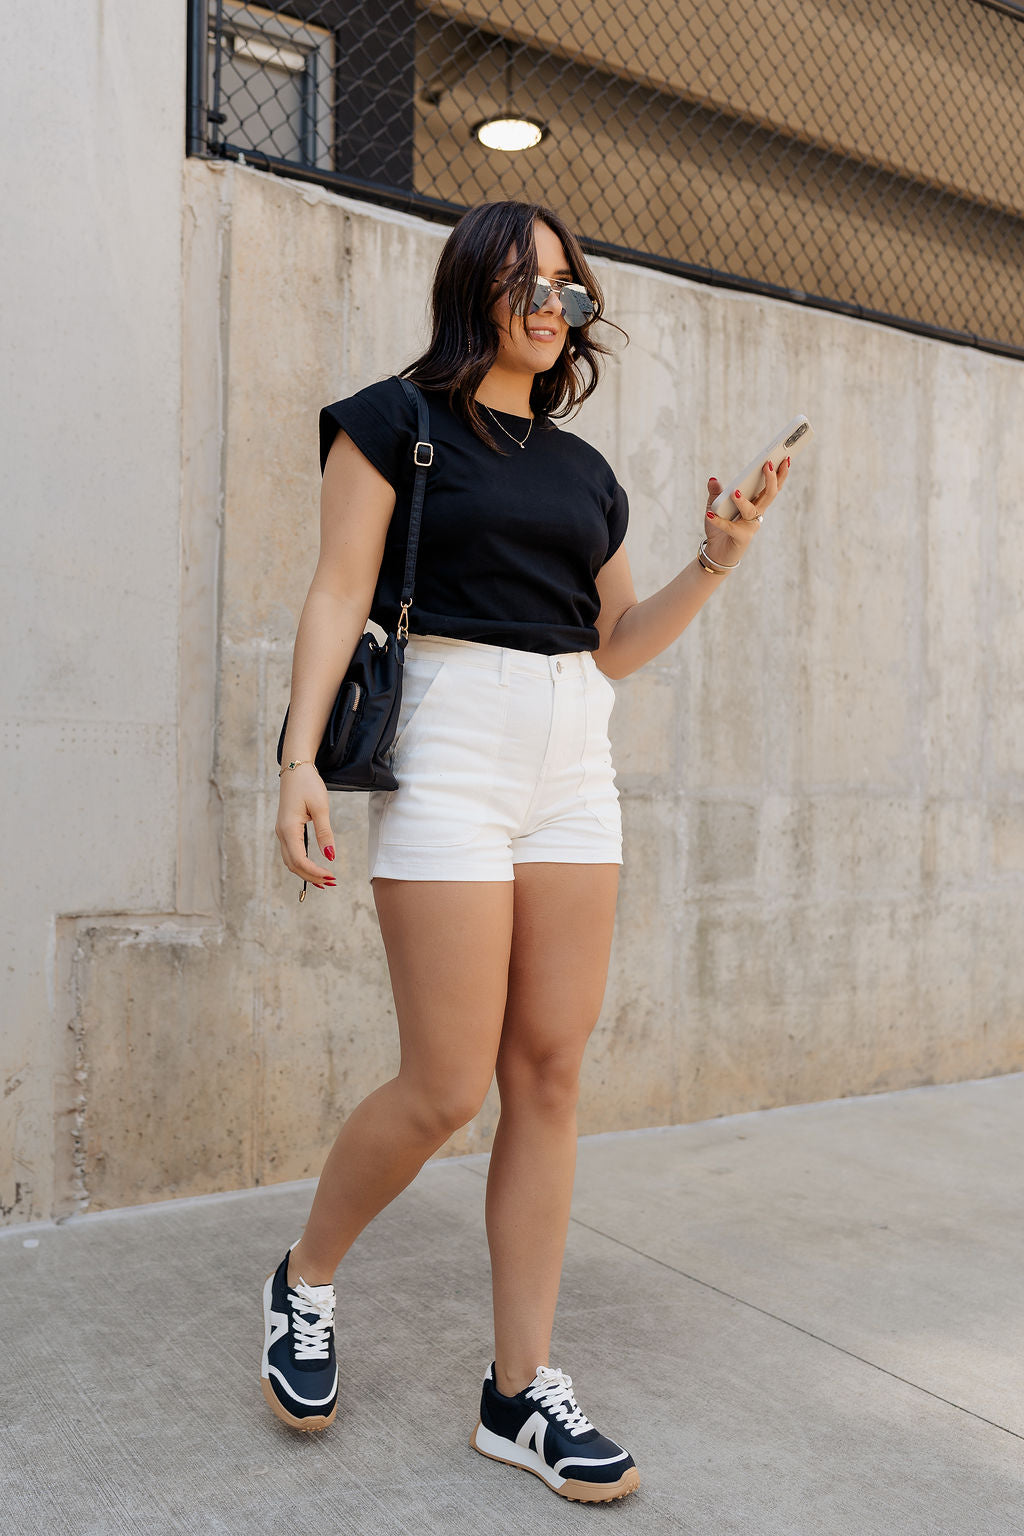 Full body view of model wearing the Iris Black Sleeveless Top that features black cotton fabric, a round neckline, and short sleeves with stitched ribbed hem details. Shirt is tucked into white shorts